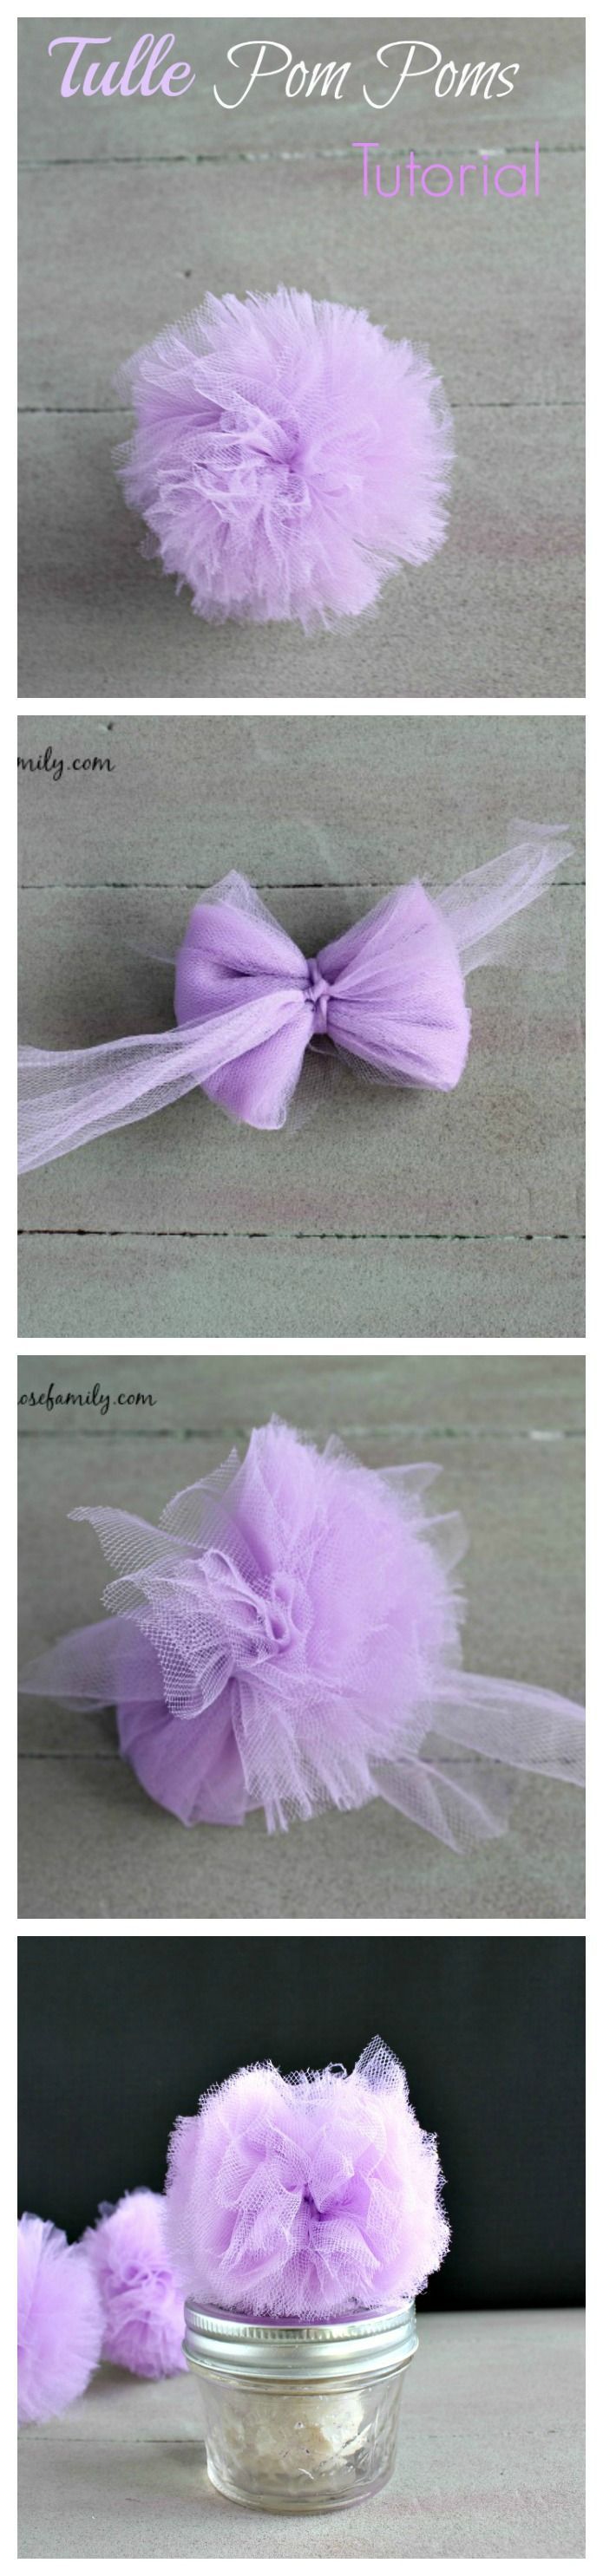 Tulle Pom Poms Tutorial for party favors or decorations.